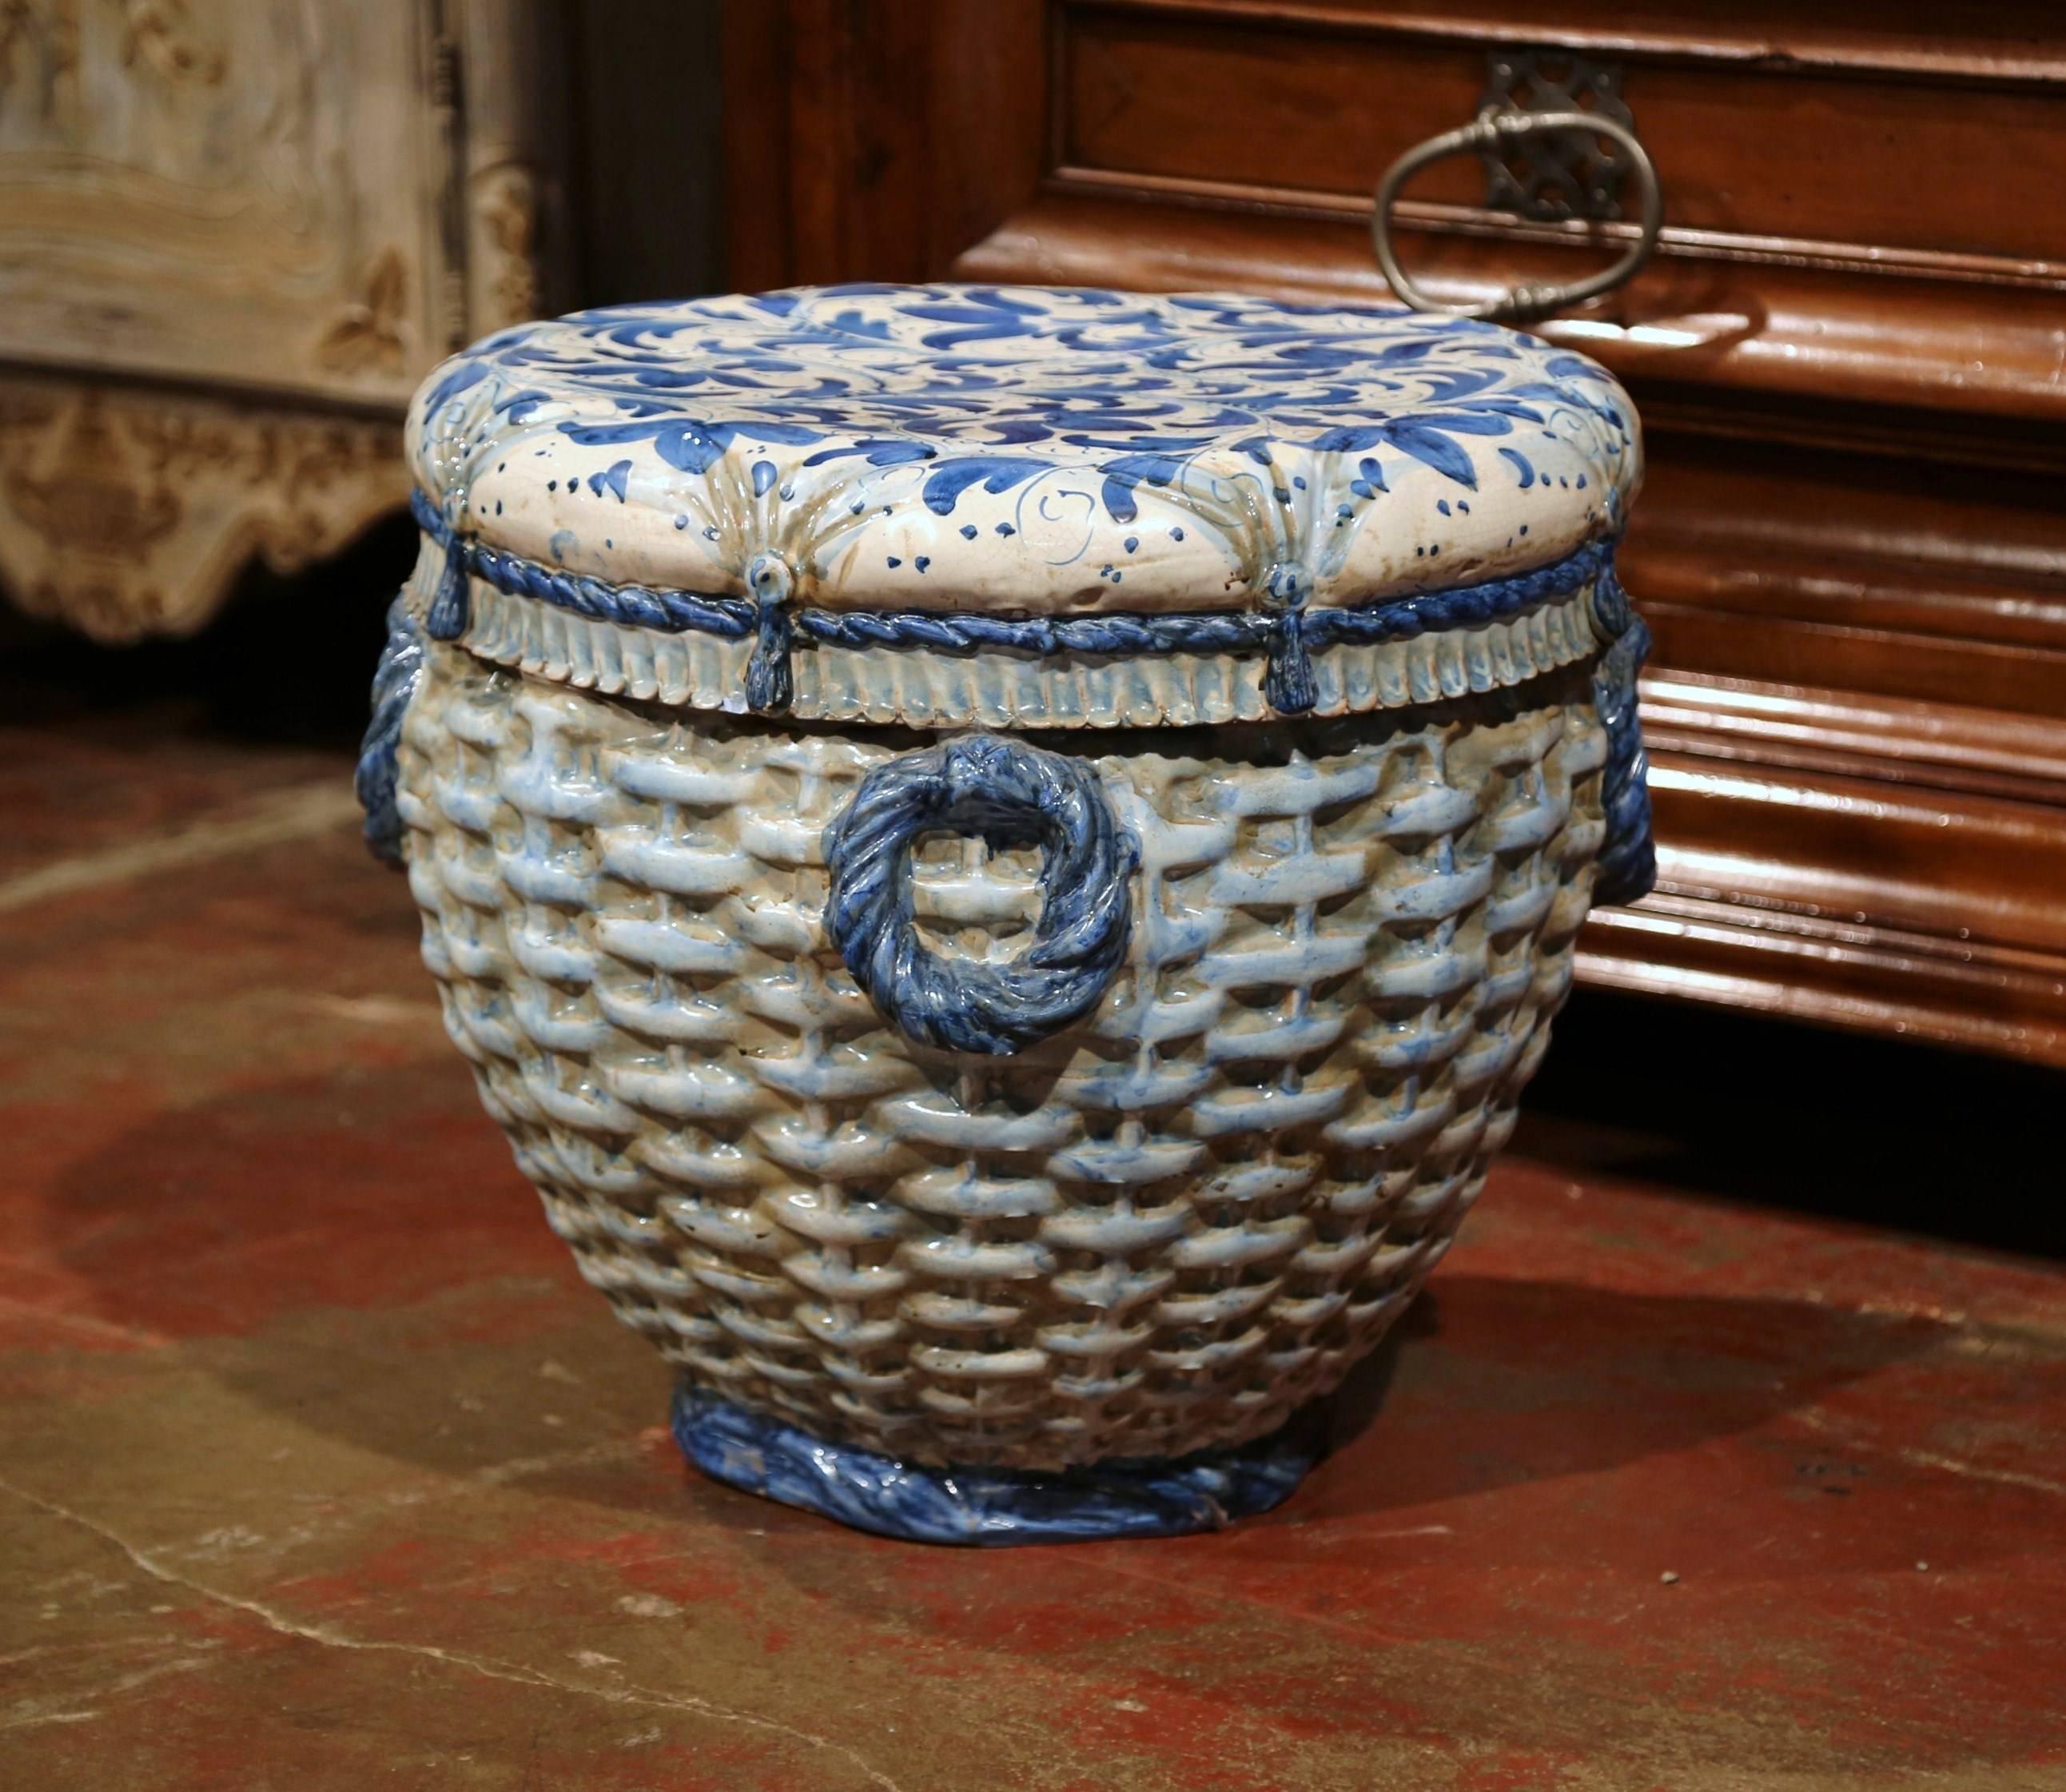 This interesting, porcelain garden seat was sculpted in France, circa 1880. Round in shape, the vintage piece features a rustic weave design with hand carved trompe l'oeil tassels and ropes around the perimeter. The piece is hand-painted in a